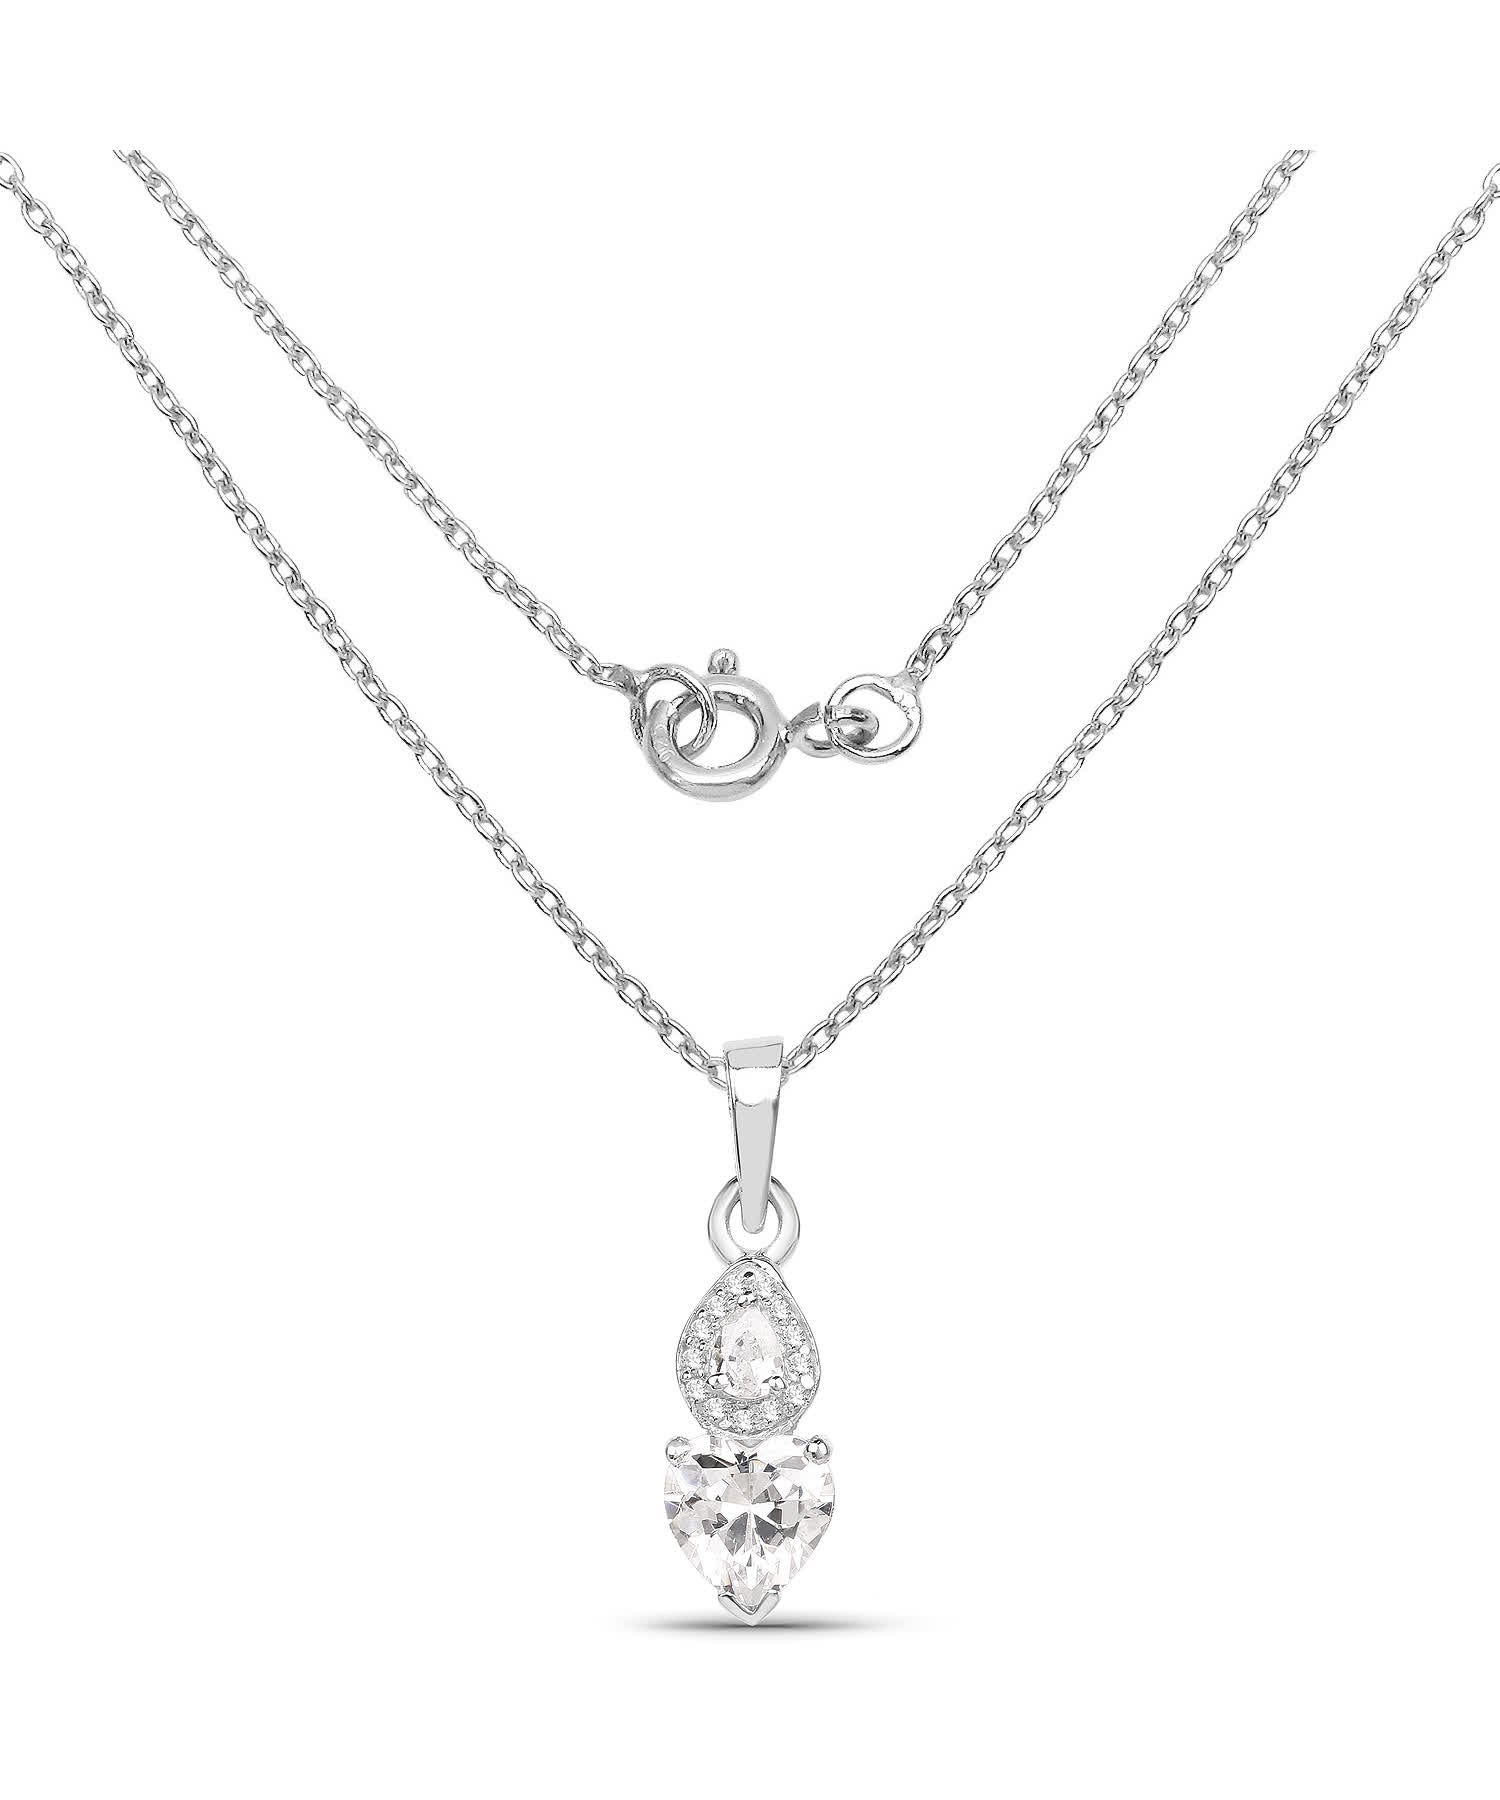 Brilliant Cut Cubic Zirconia Rhodium Plated 925 Sterling Silver Heart Pendant With Chain View 2